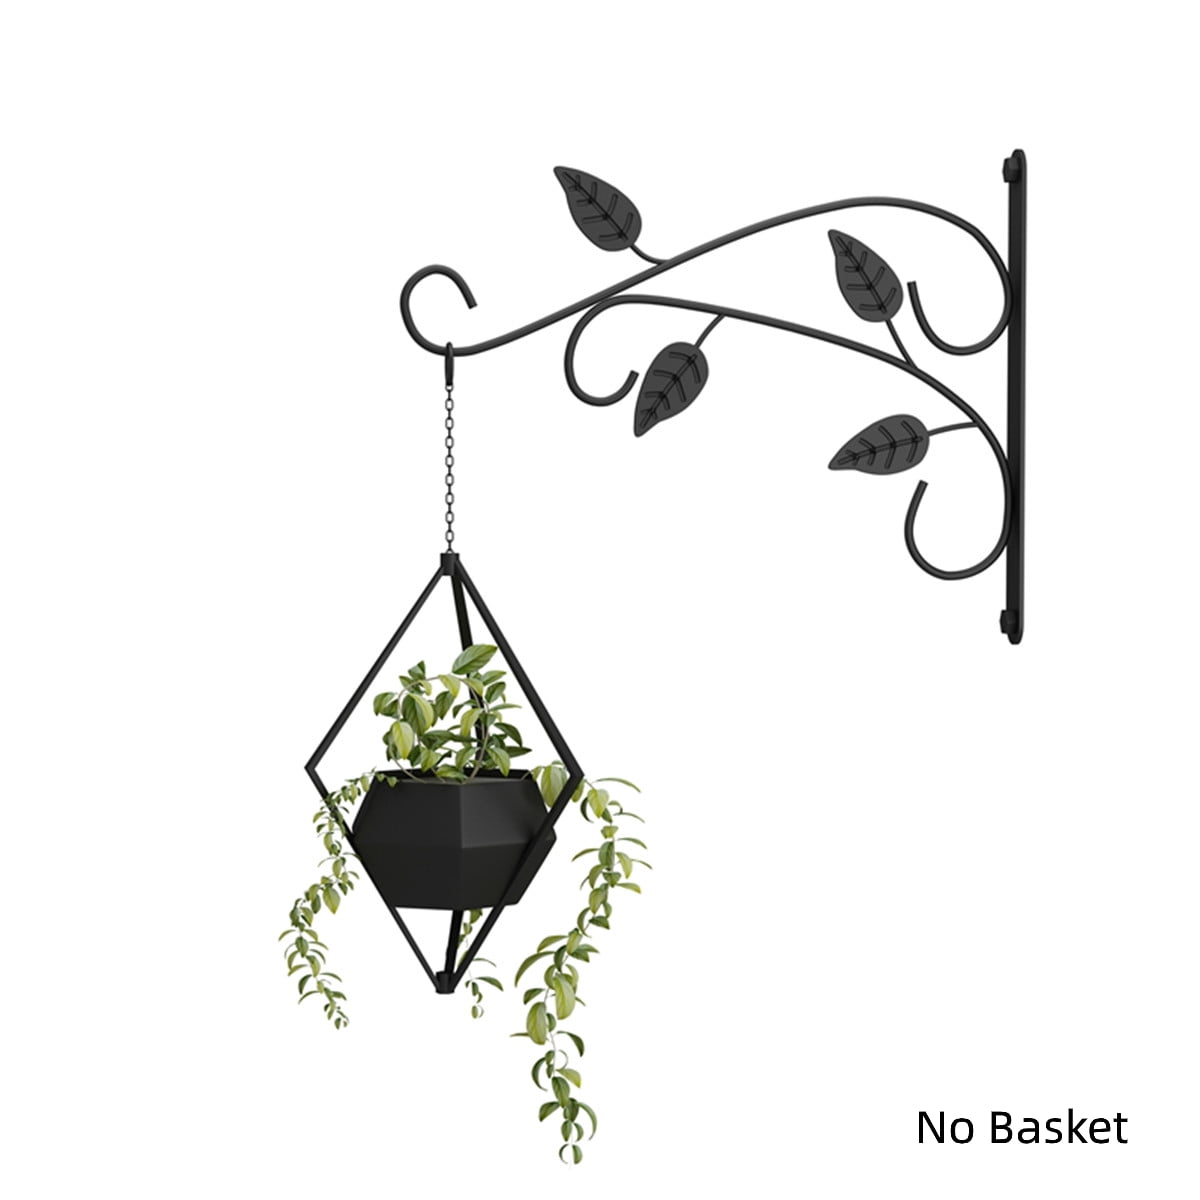 Wind Chimes Planters Lanterns TIMESETL 10 Pack Rustic Iron Wall Hooks Set Metal Lantern Bracket Plant Hangers for Hanging Bird Feeders Coats 1.6 Inch Vintage Home Decor Indoor & Outdoor